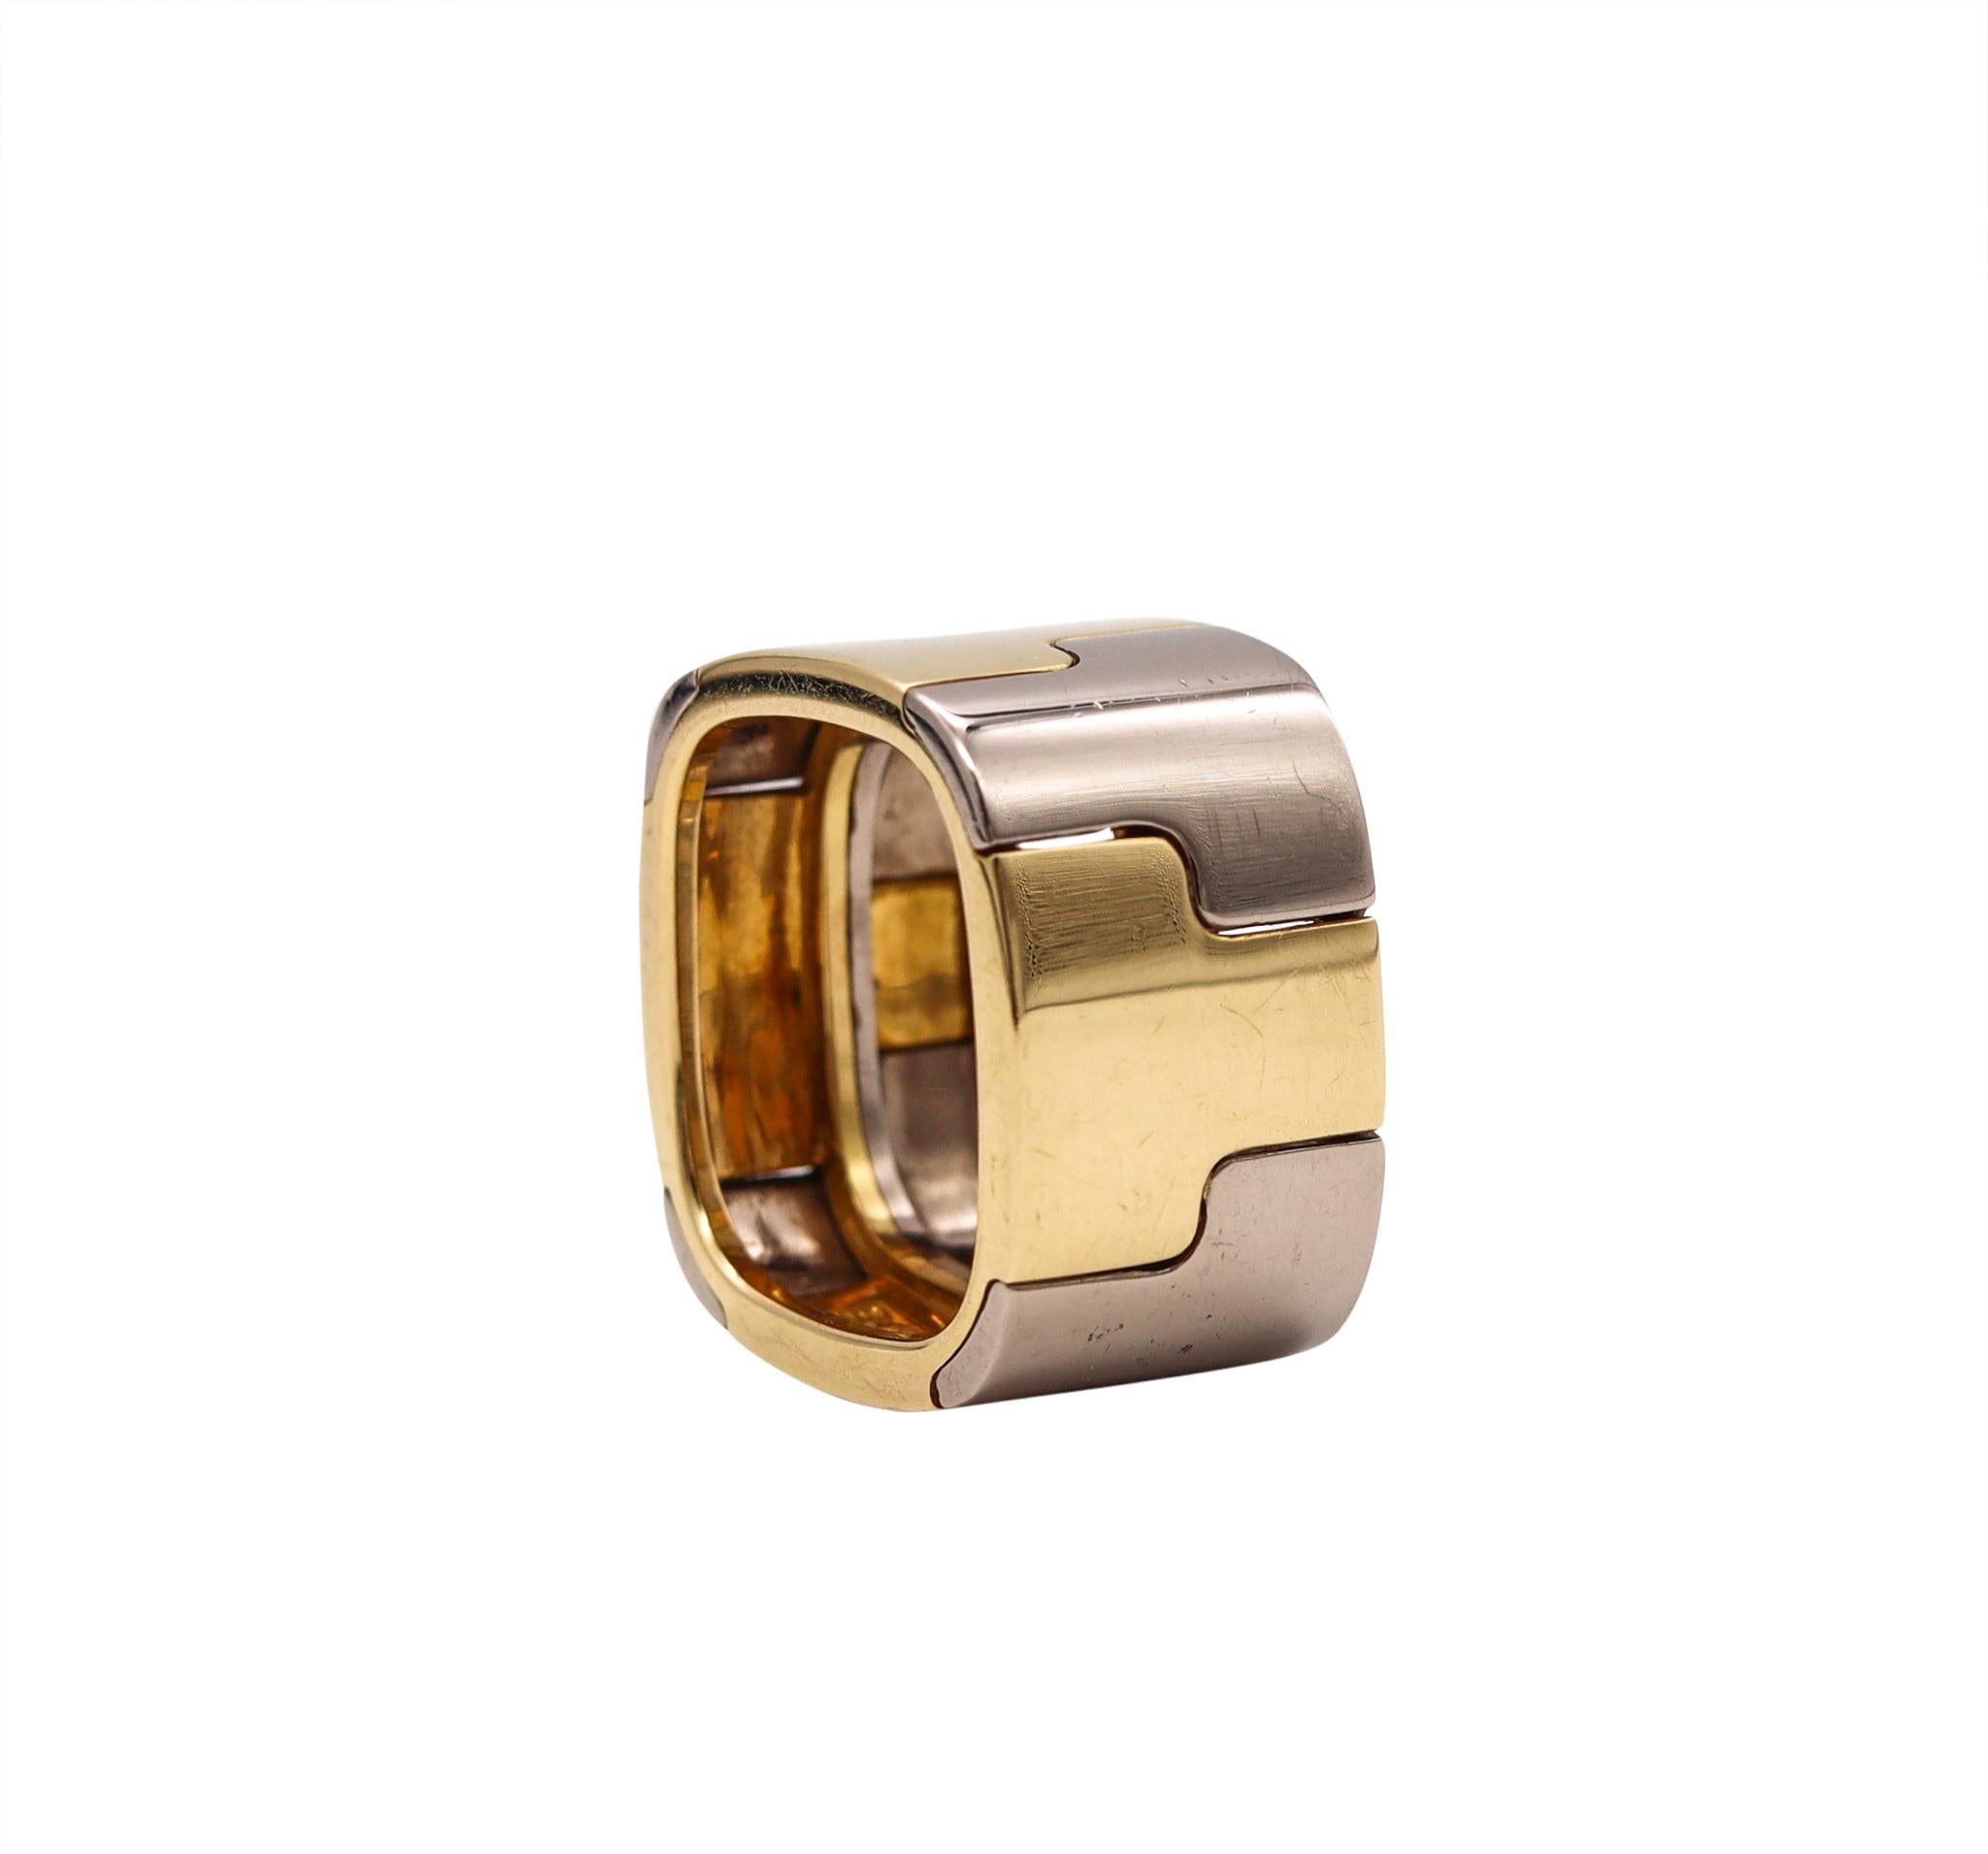 Gubelin 1970 by Paul Binder Geometric Puzzle Ring in Two Tones of 18Kt Gold For Sale 5